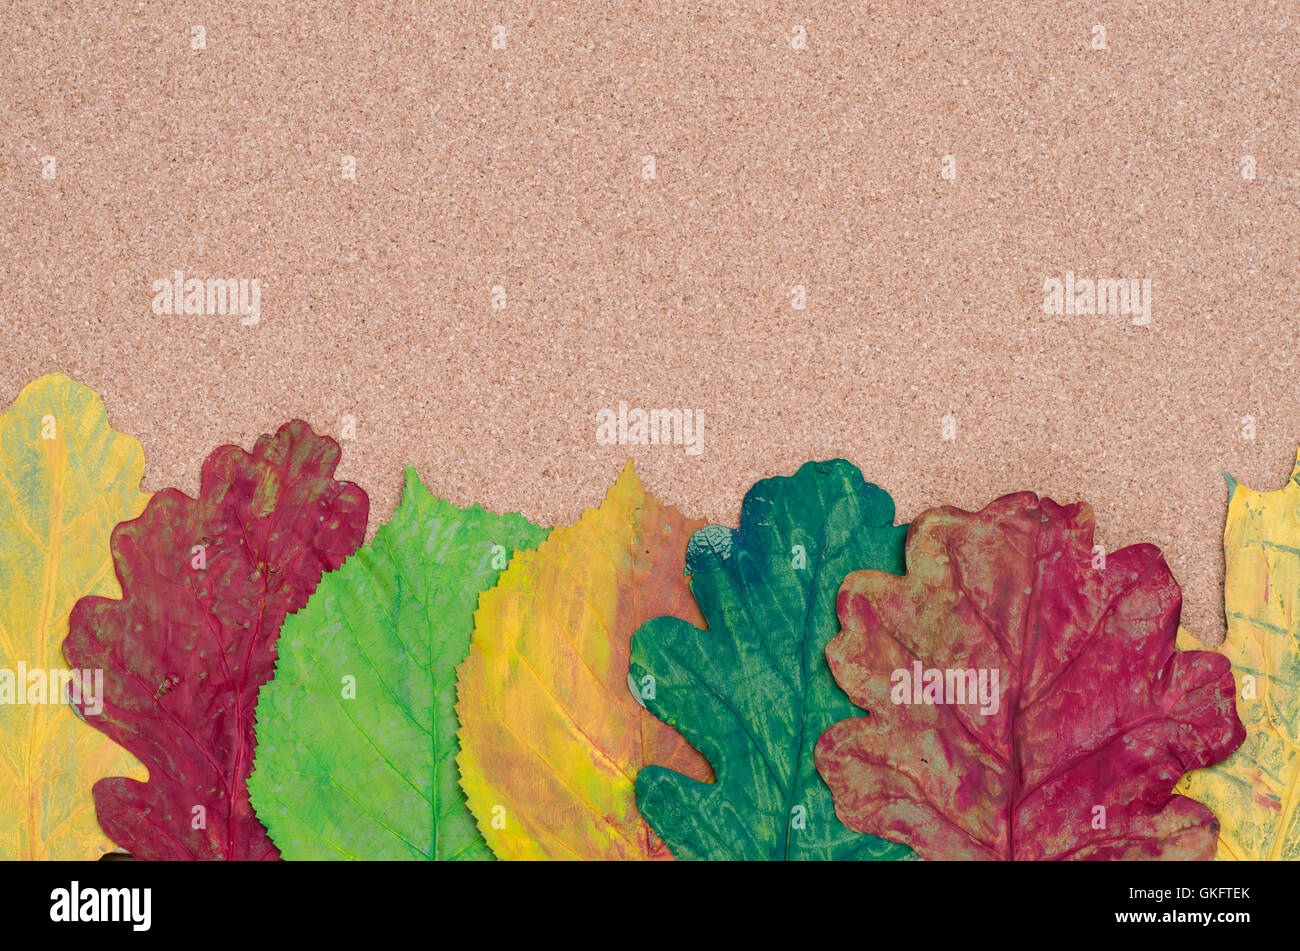 multicolored painted fall leaves composition Stock Photo